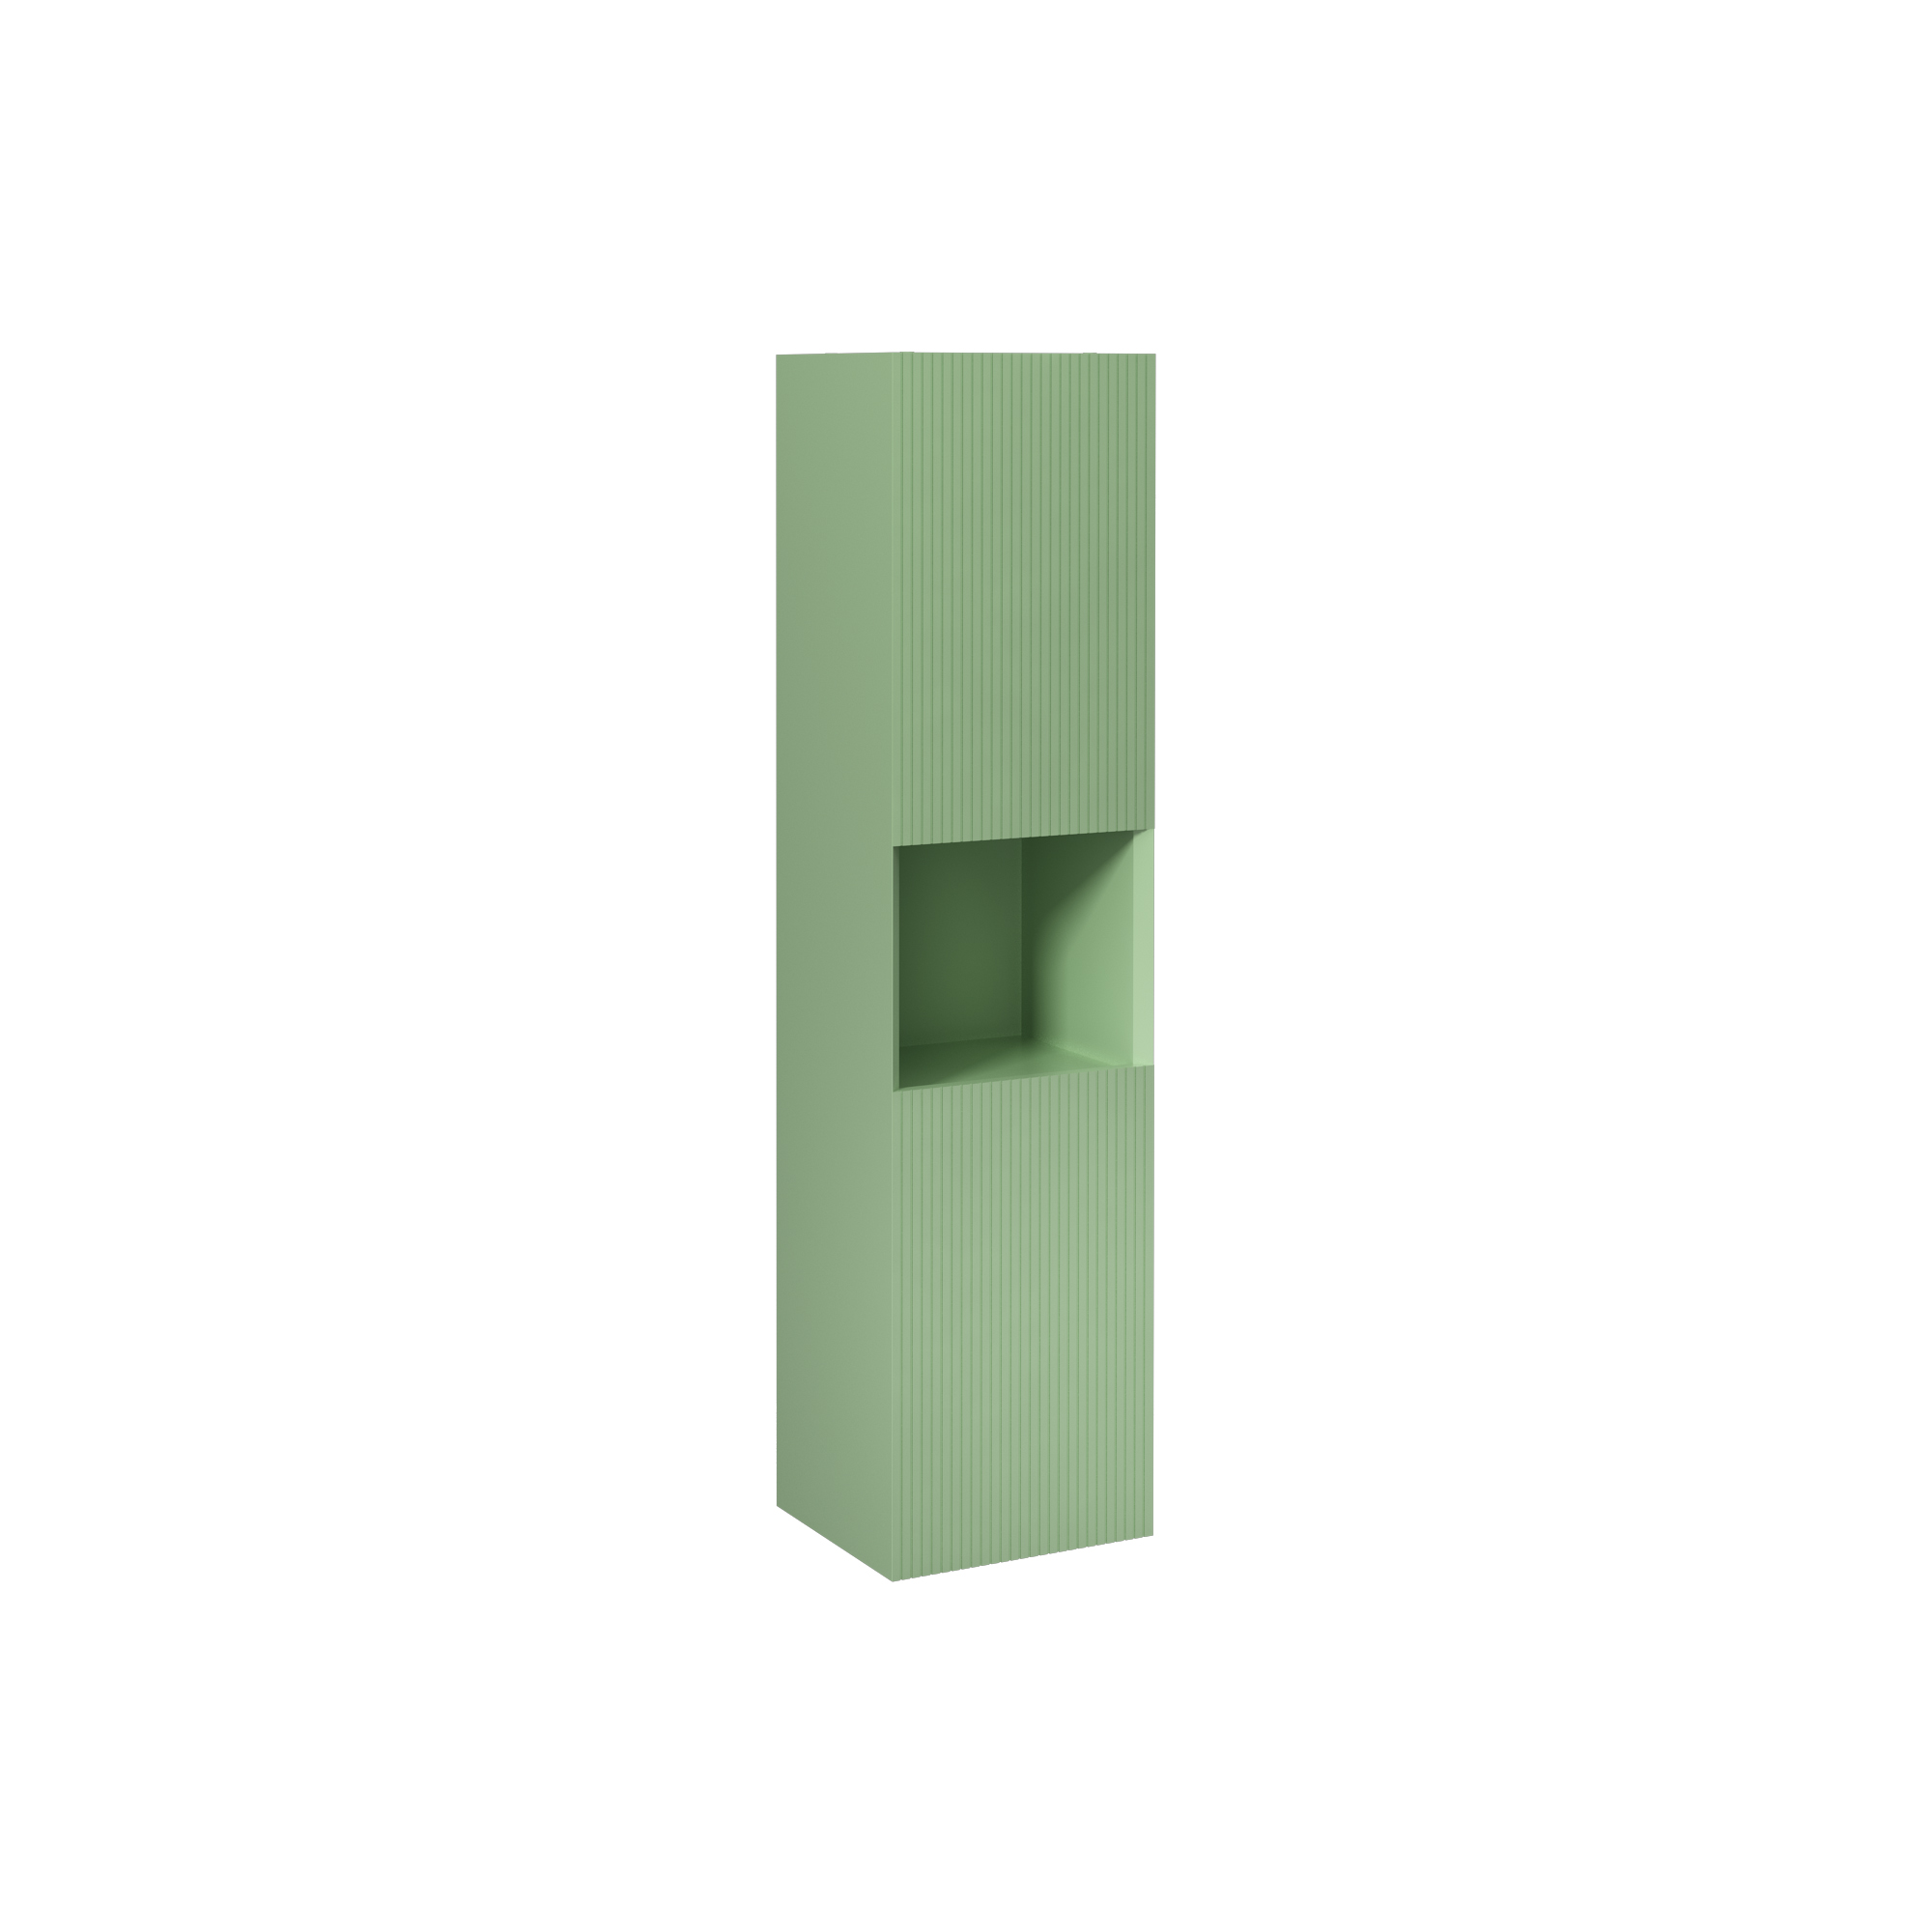 Infinity Tall Cabinet, Pastel Green Left 14"